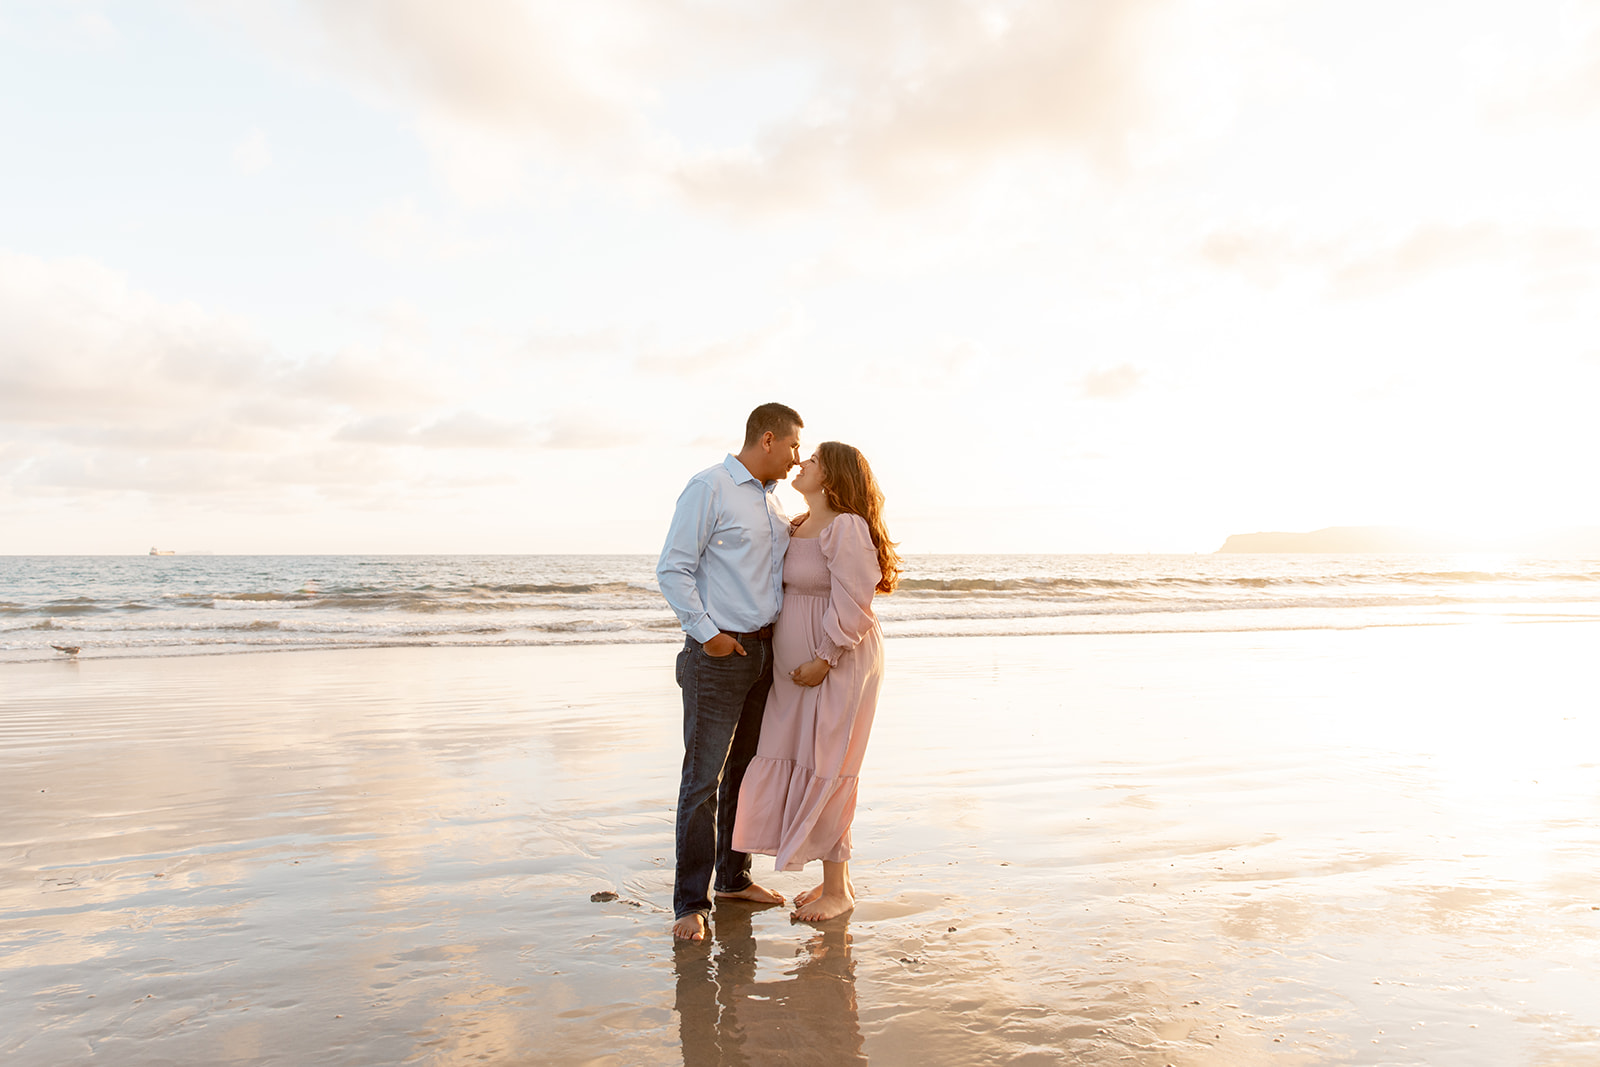 A mom to be stands in a pink maternity dress kissing her husband in a blue shirt on a beach at sunset